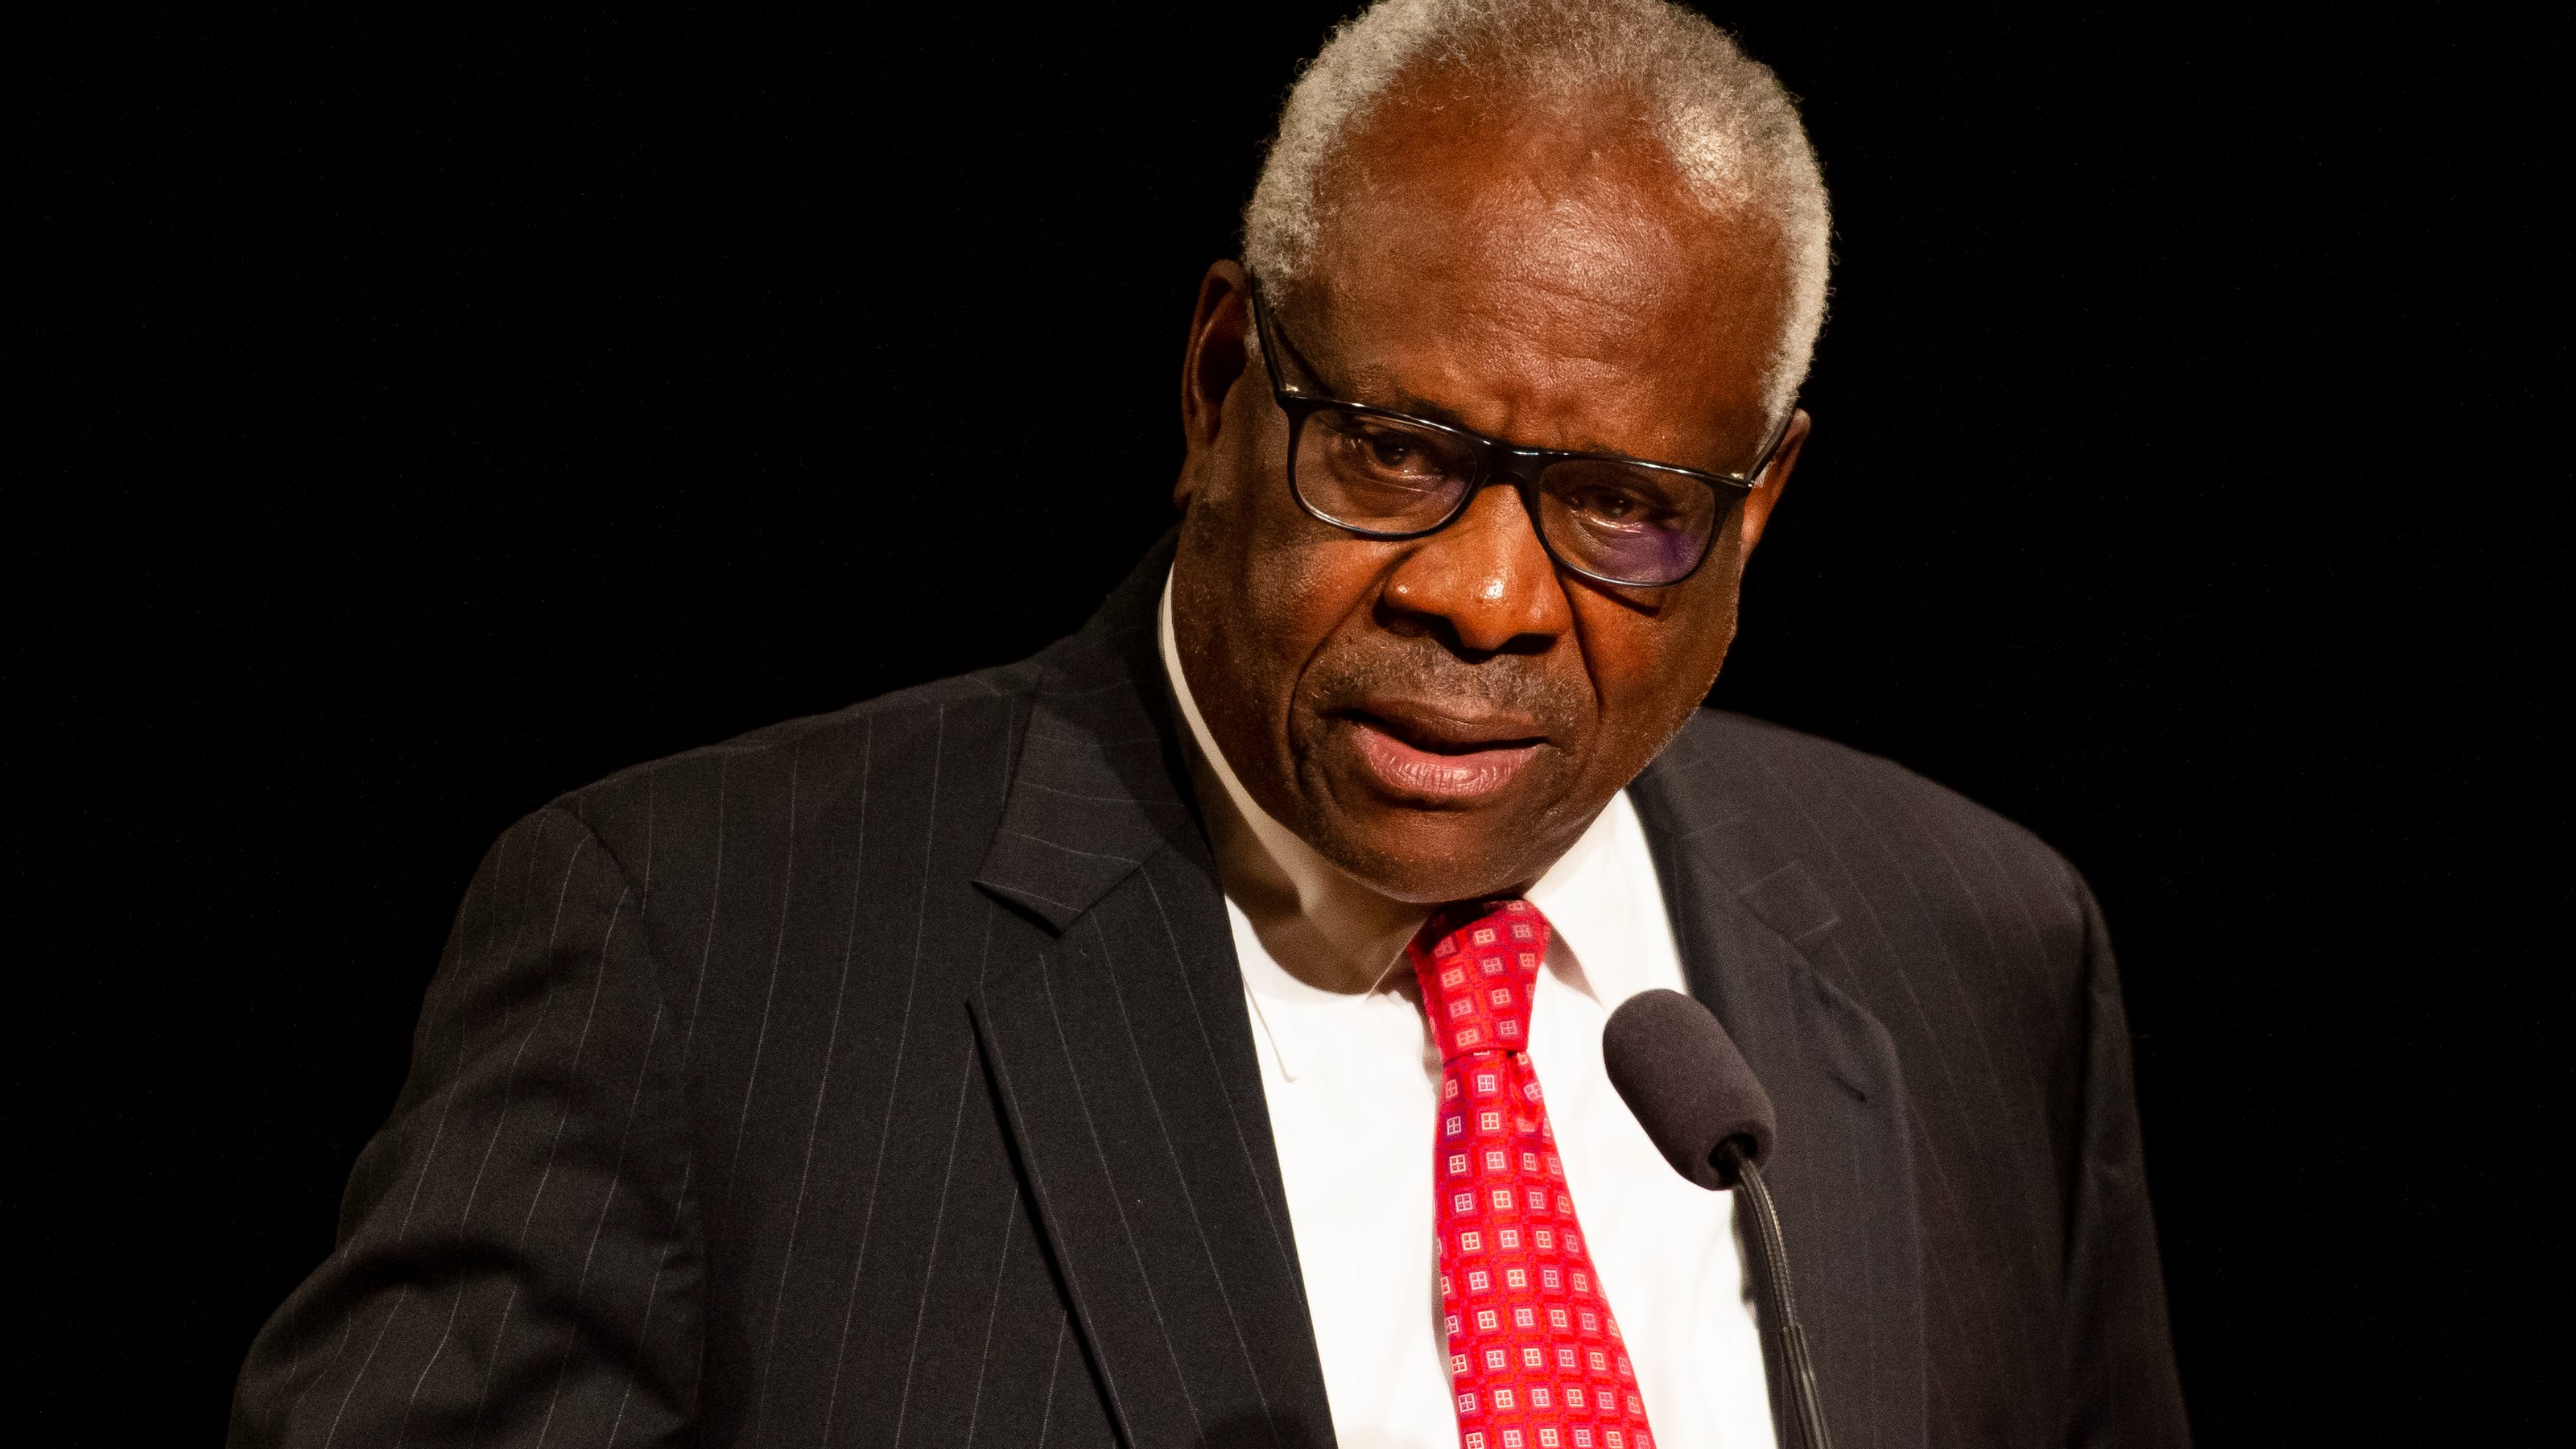 Justice Clarence Thomas released from hospital after infection